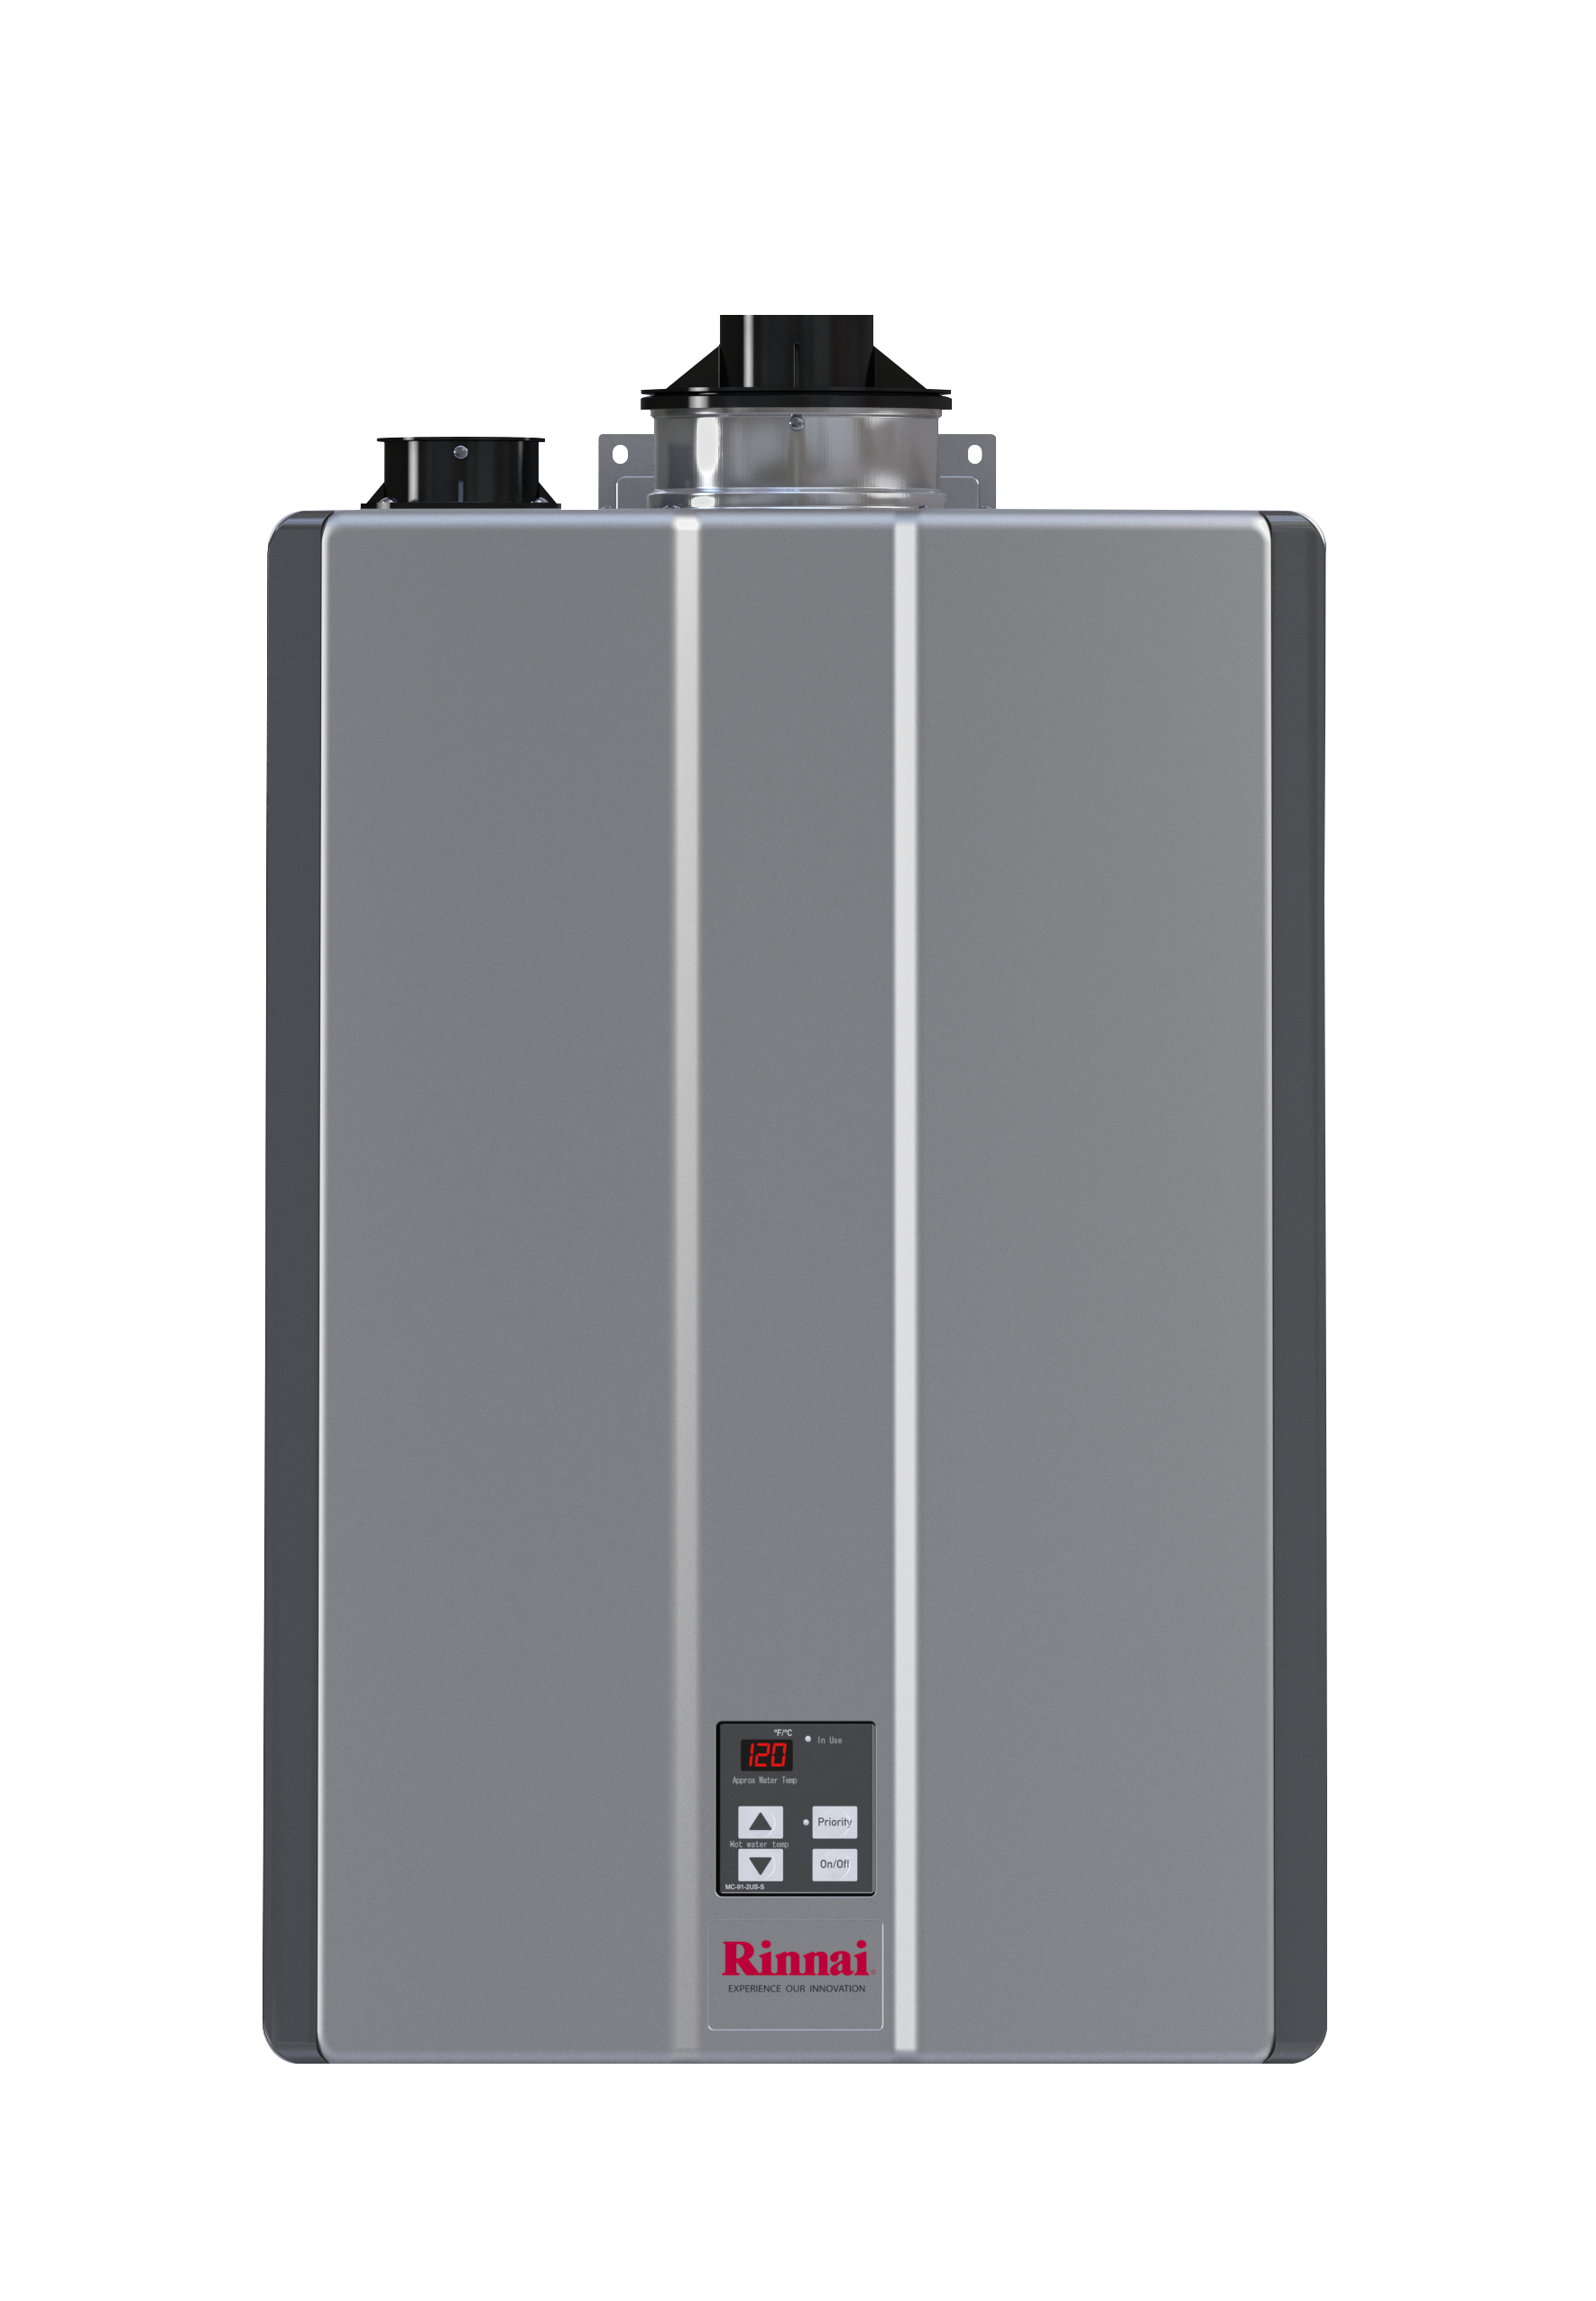 Rebates For Electric Tankless Water Heaters